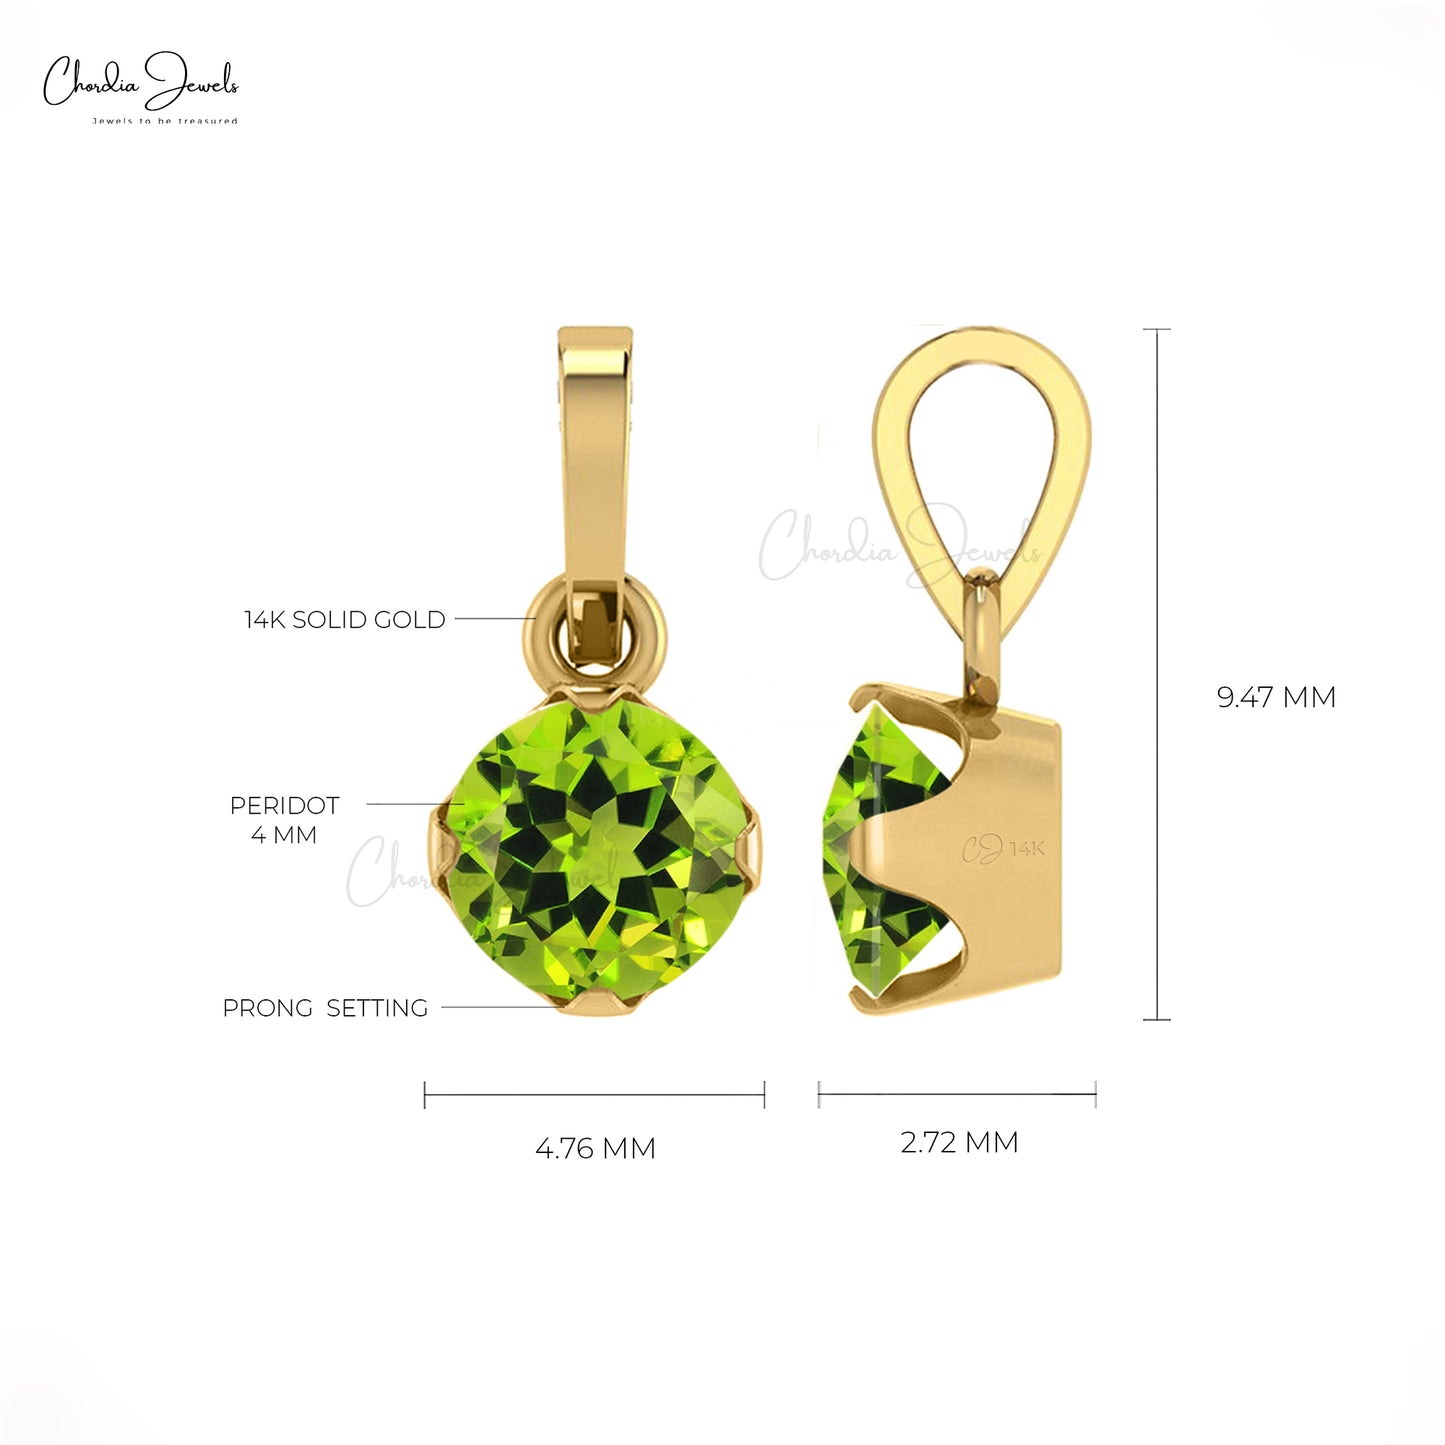 Natural Peridot Solitaire Pendant 14k Real Gold Hallmarked Pendant 4mm Round Cut Gemstone Pendant For Surprise Gift